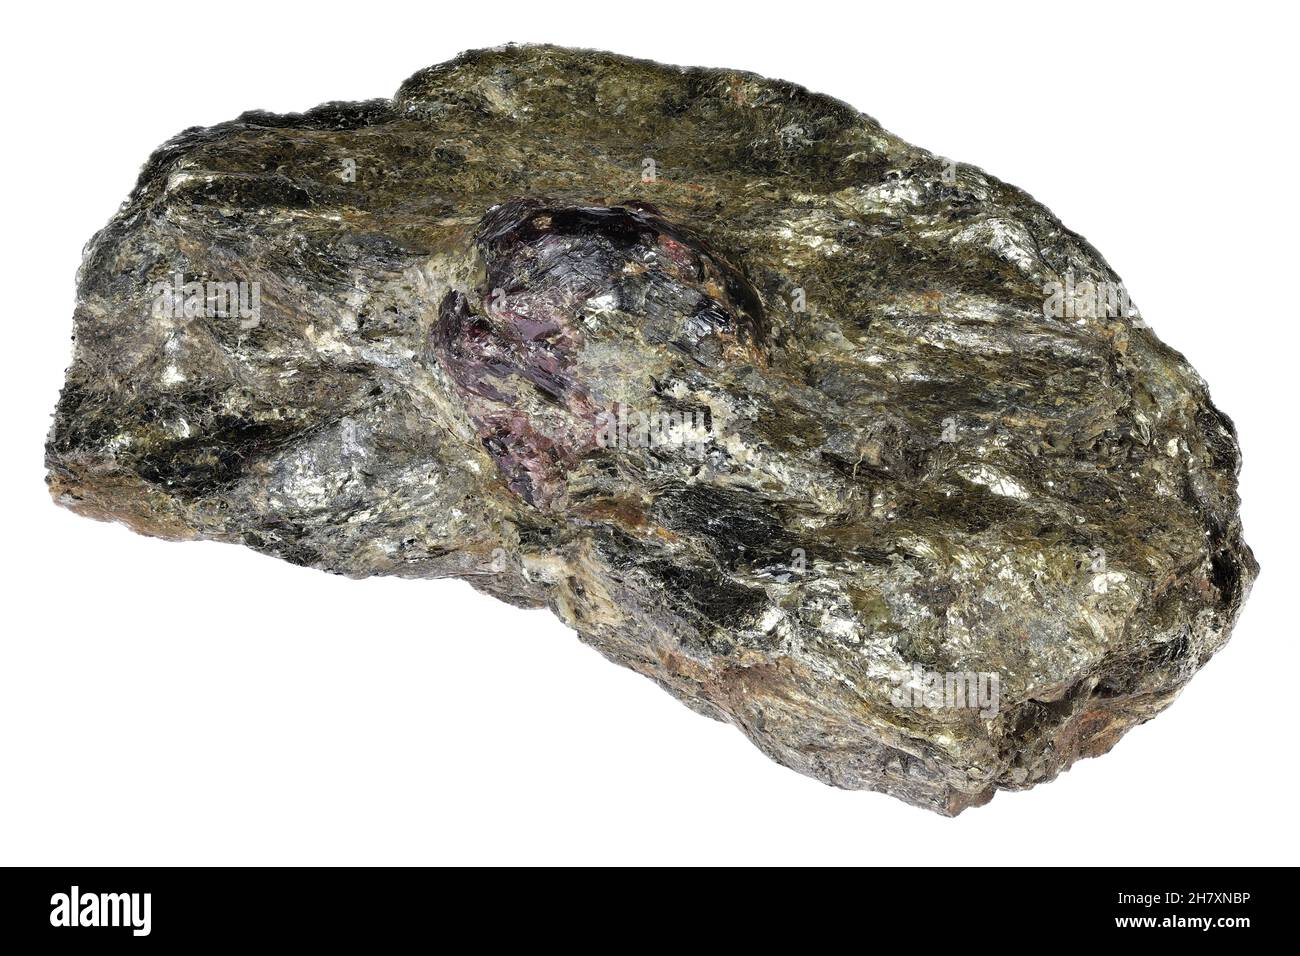 almandine garnet in mica schist from Karelia, Russia isolated on white background Stock Photo